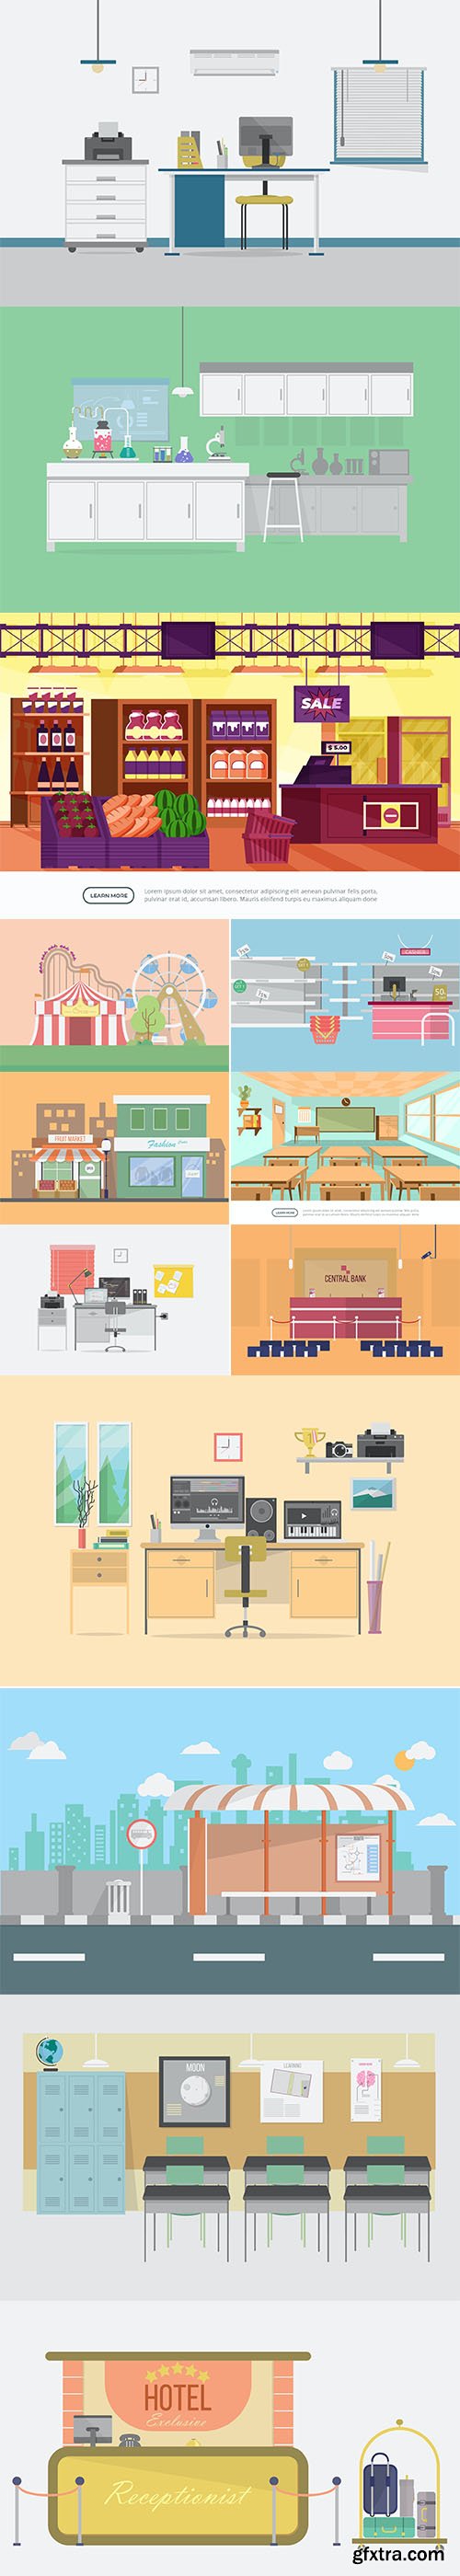 Building inside and outside vector illustrations